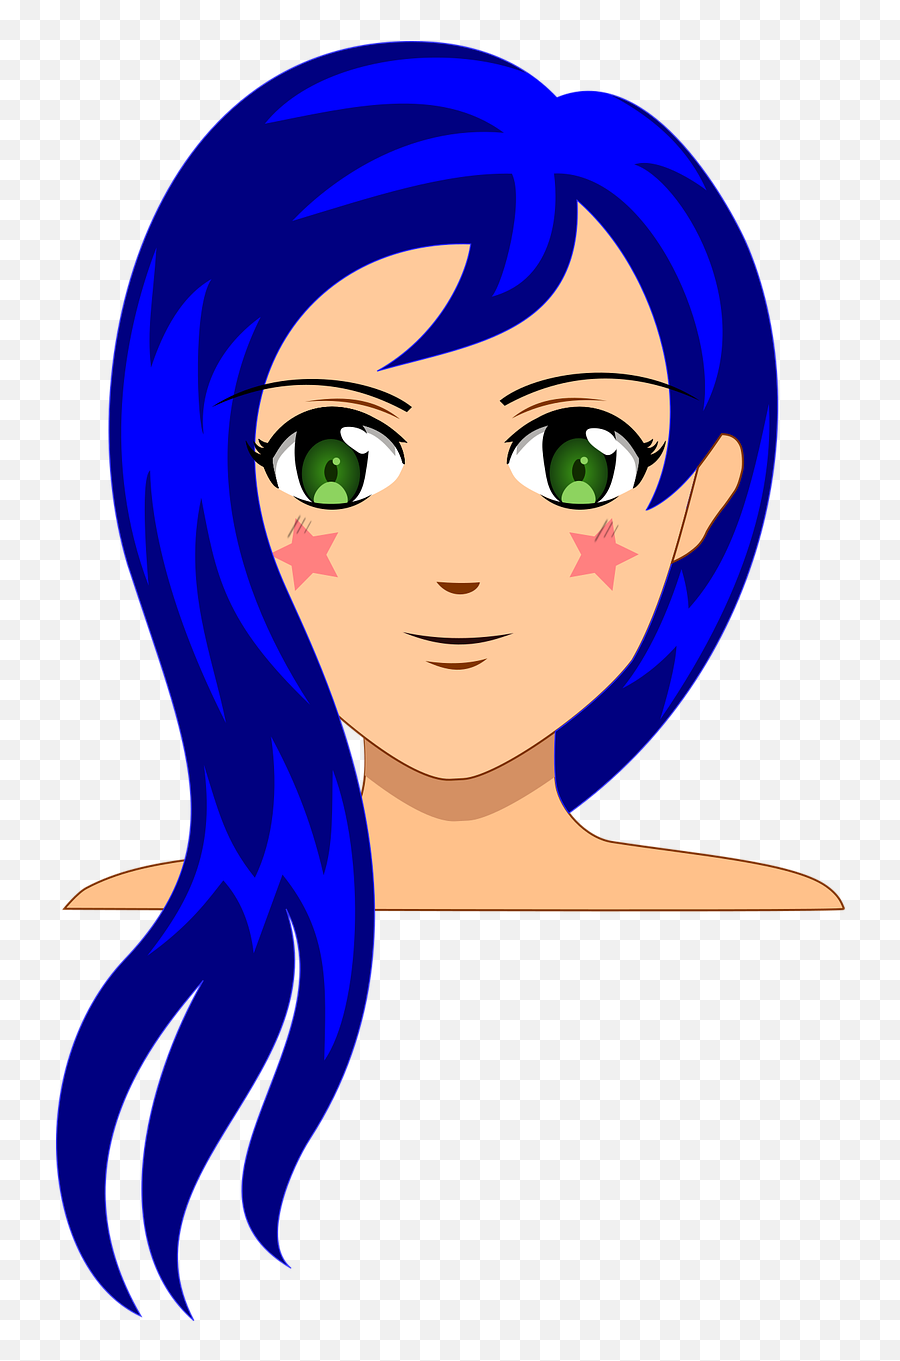 Anime Little Girl Smile - Free Vector Graphic On Pixabay For Women Emoji,Emoticons Girls With Hair